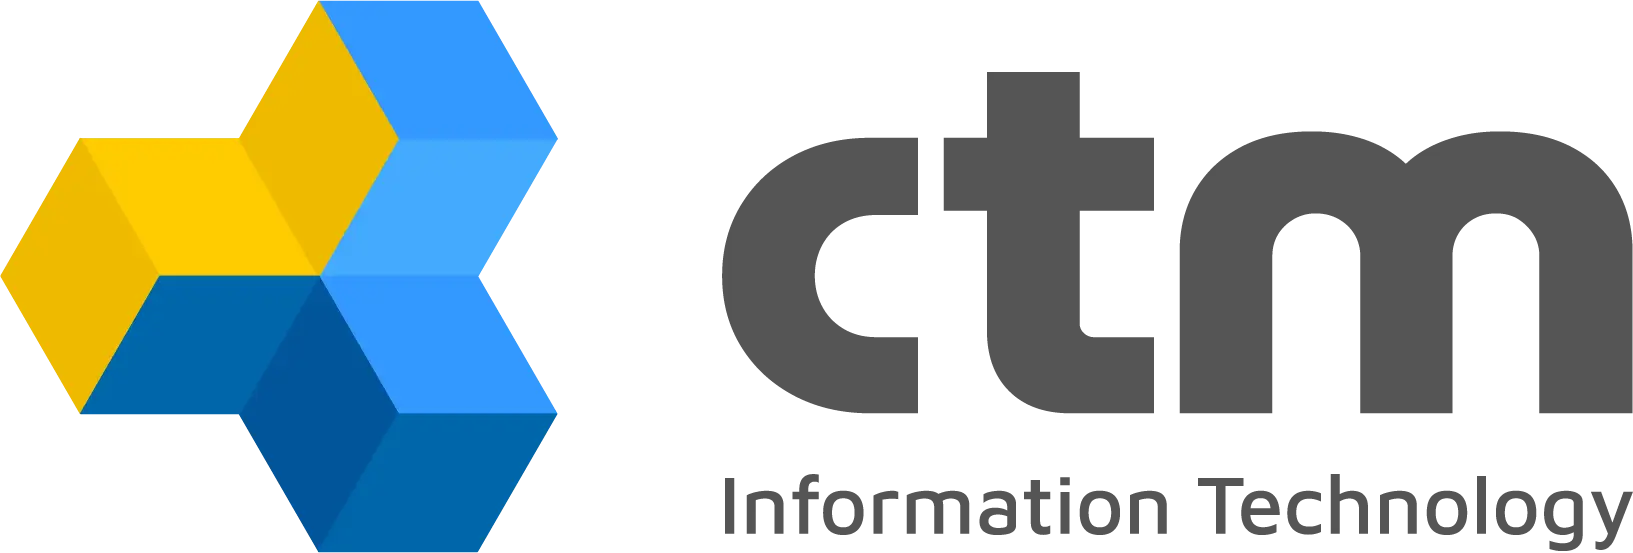 ctm Information Technology